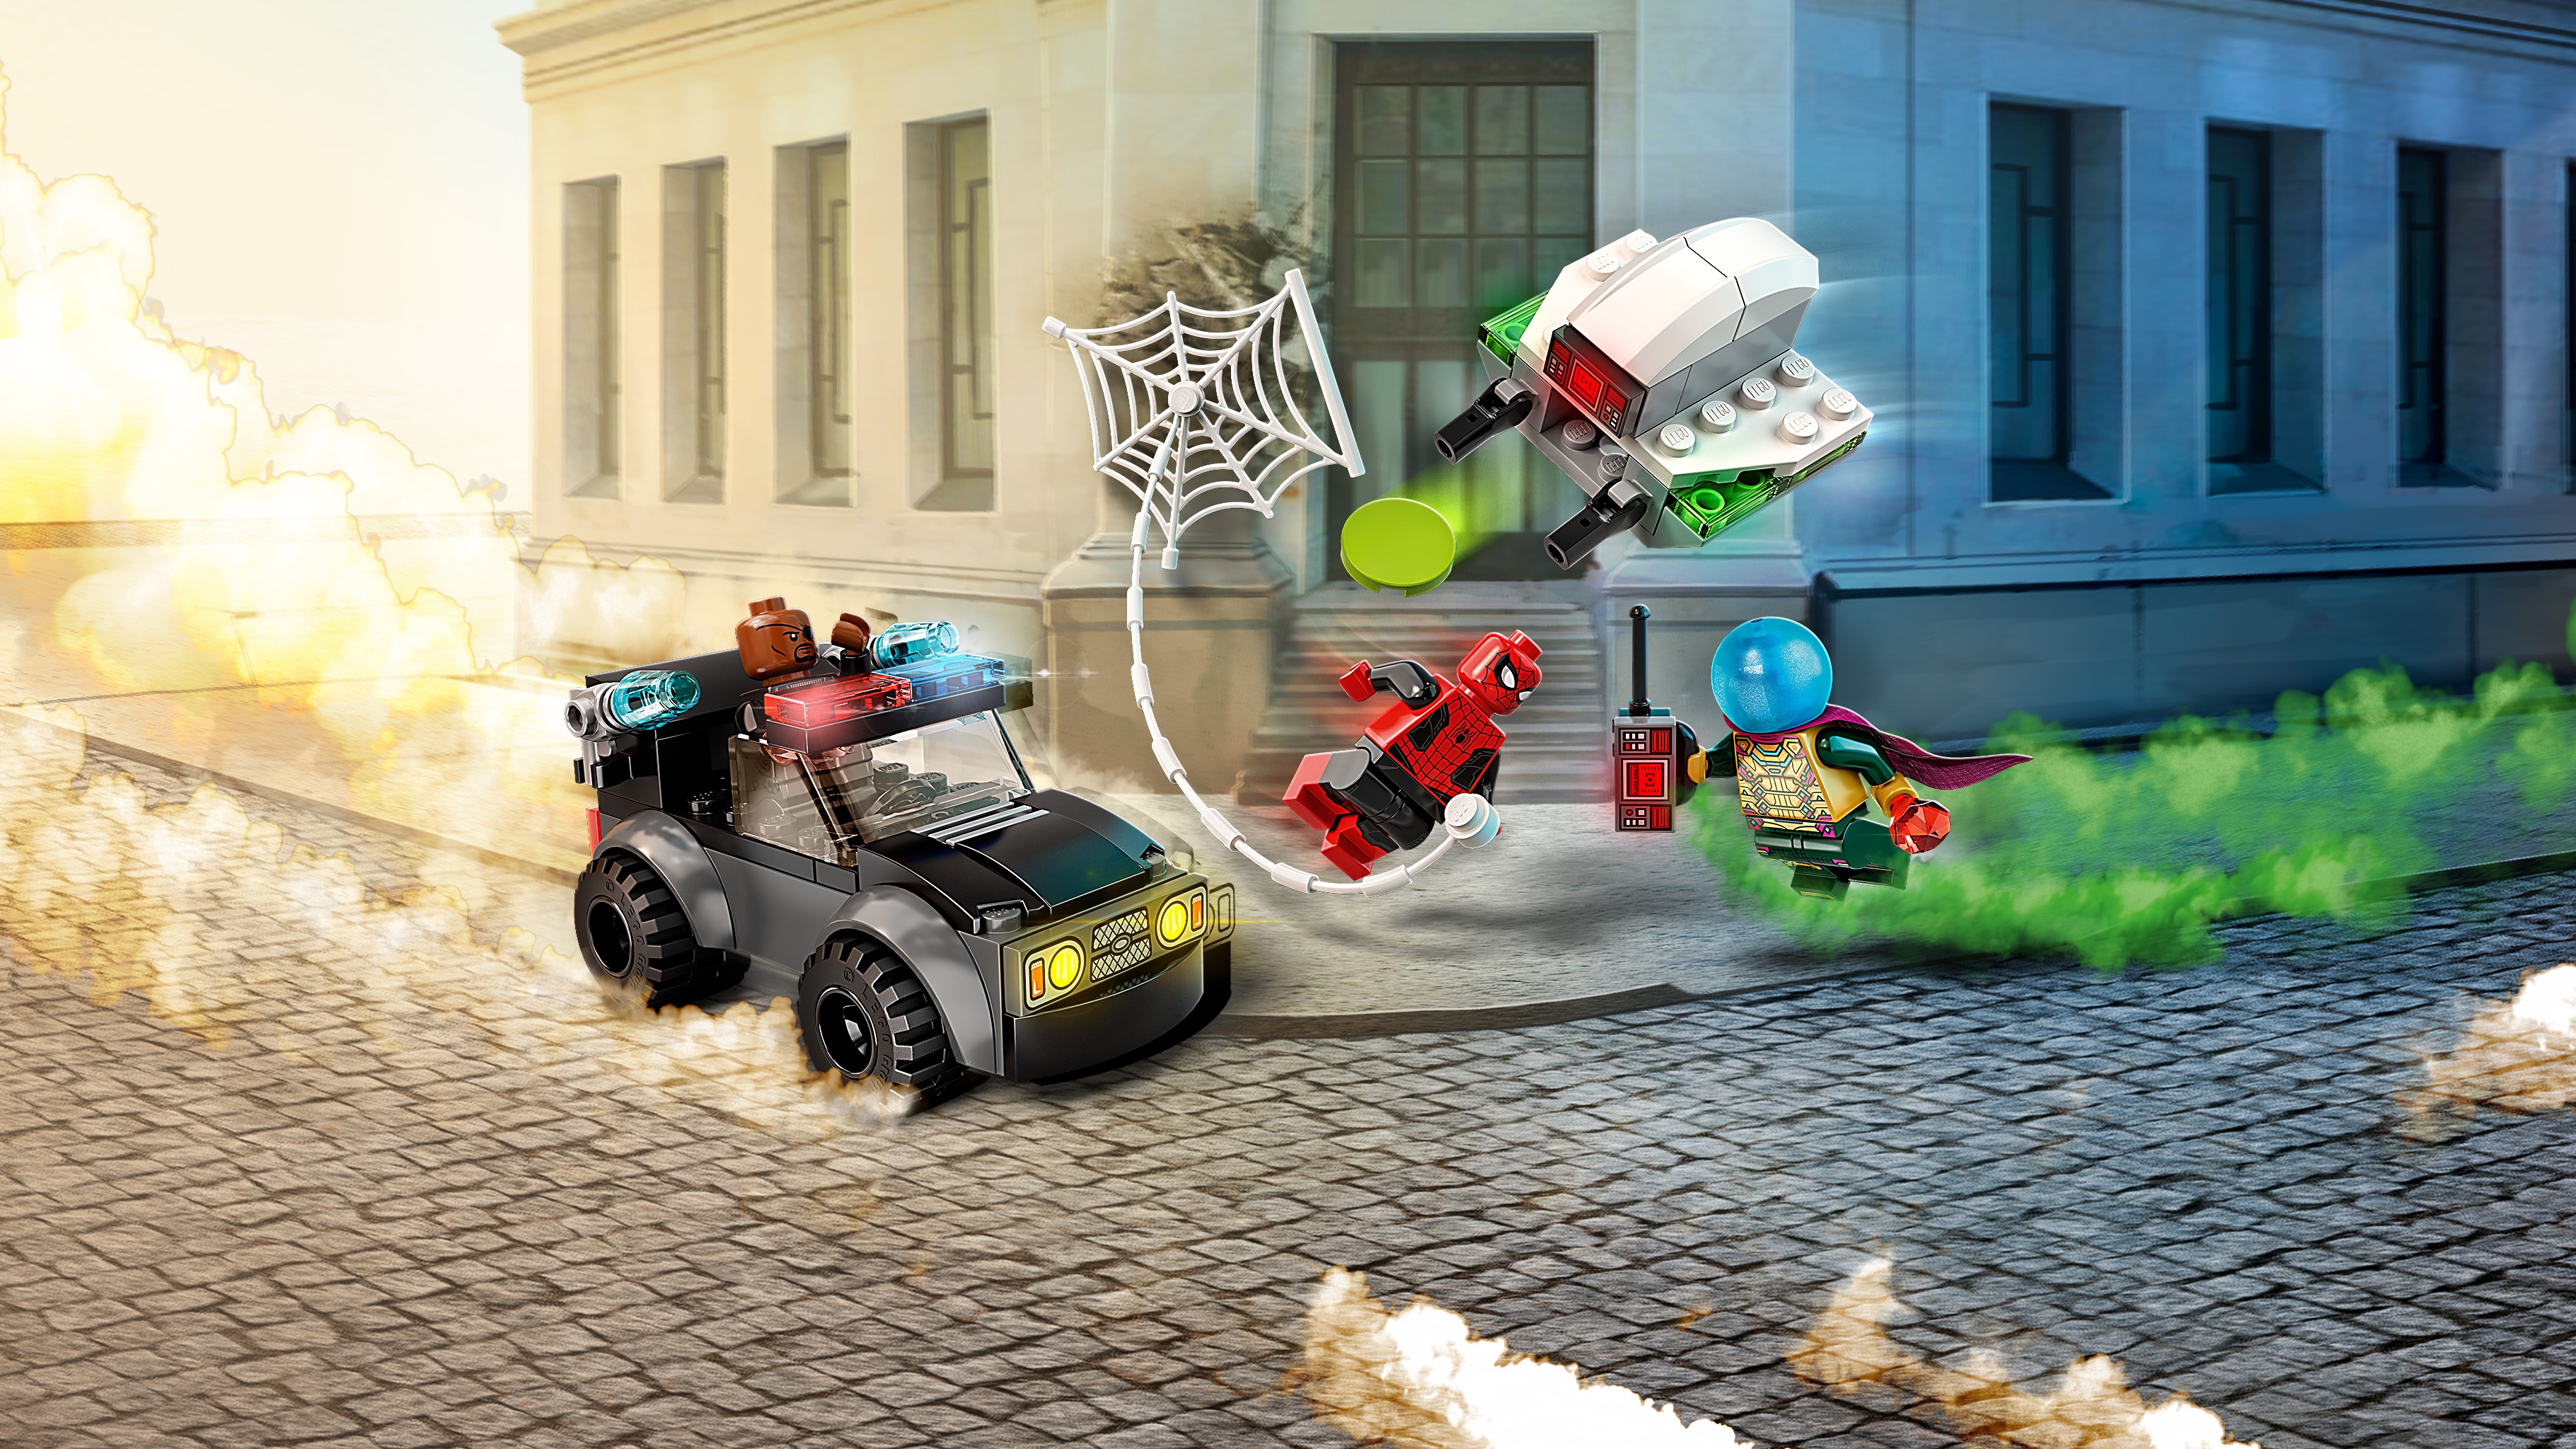 Spider-Man vs. Mysterio's Drone Attack 76184 - LEGO® Marvel Sets - for kids